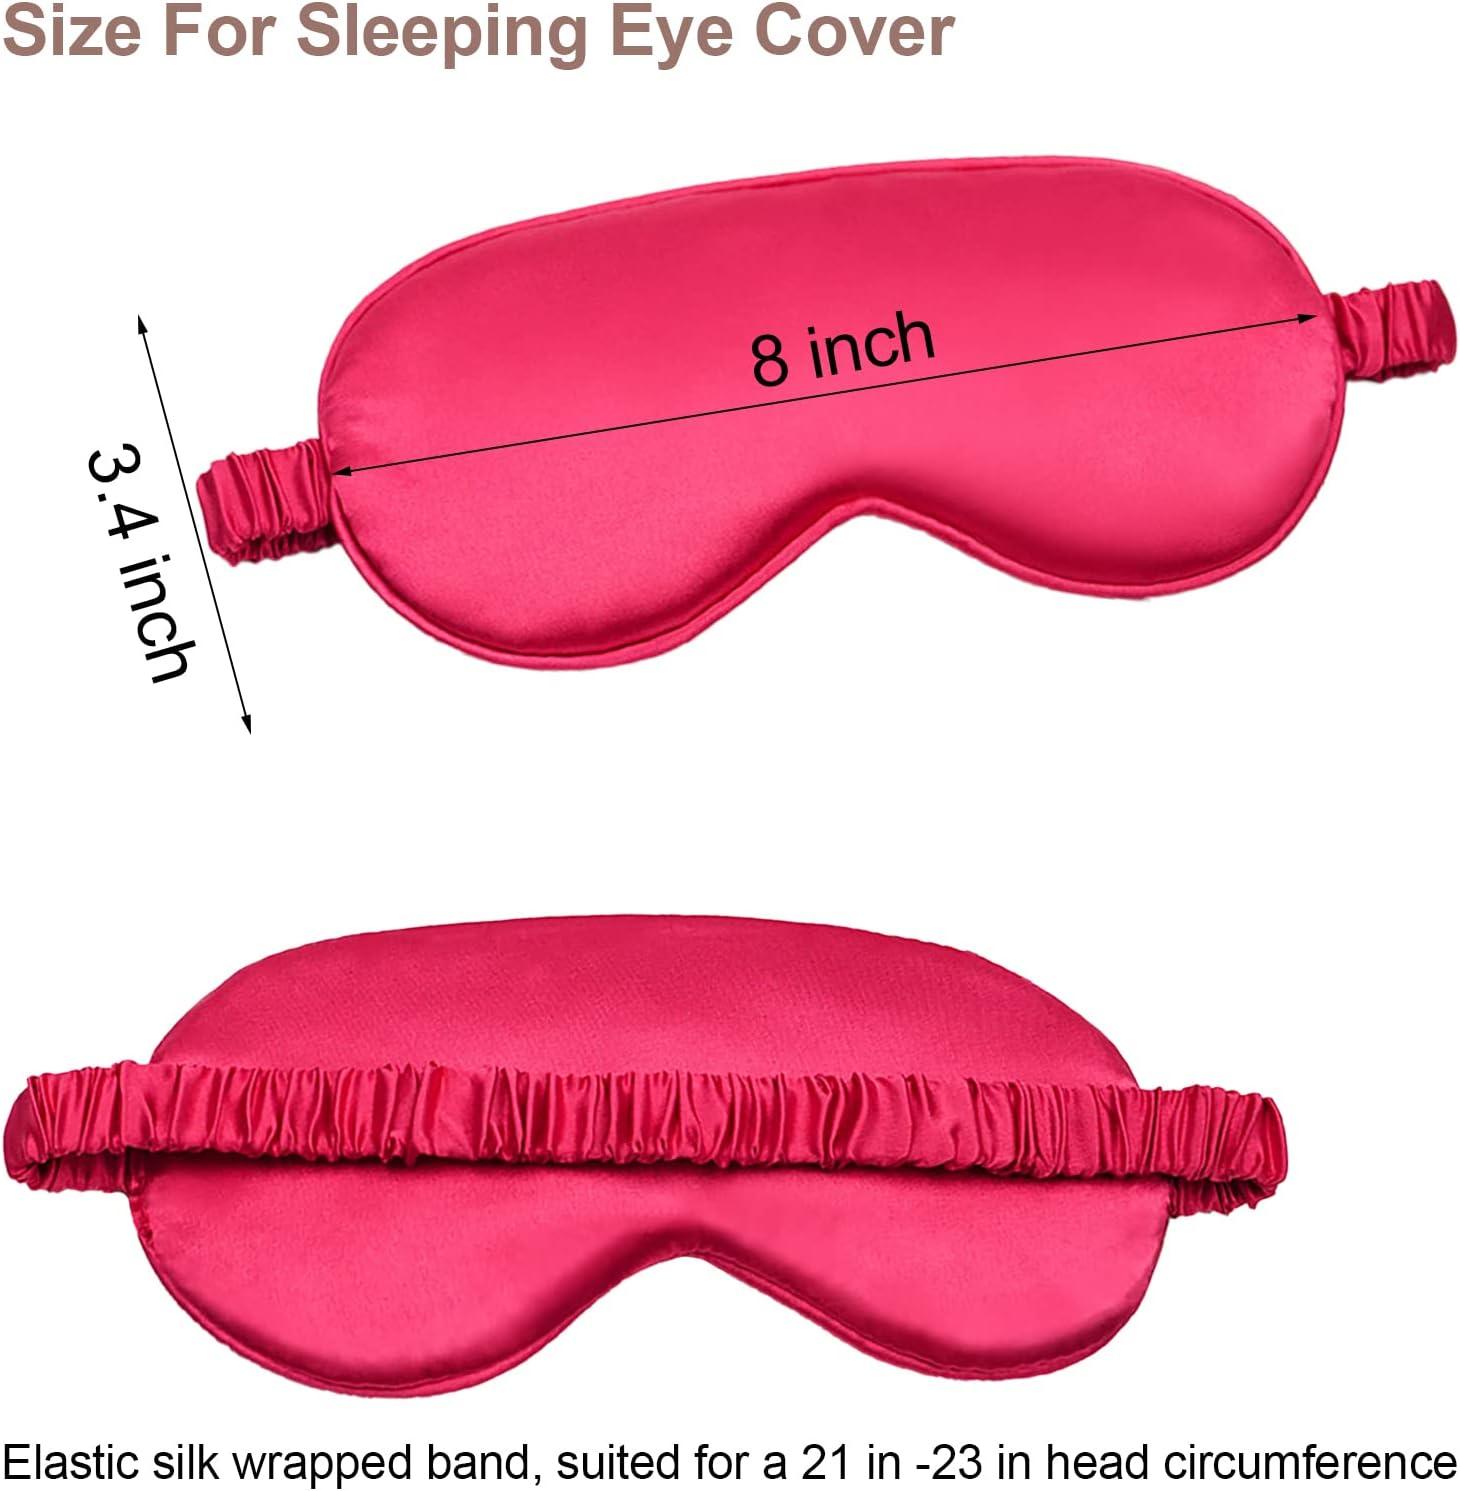 Sleep Mask, Silk Sleeping Eye Mask for Women Men, Double Sided with  Adjustable Ear Loops Eye Cover, Light Comfy Blindfold for Travel Yoga Nap